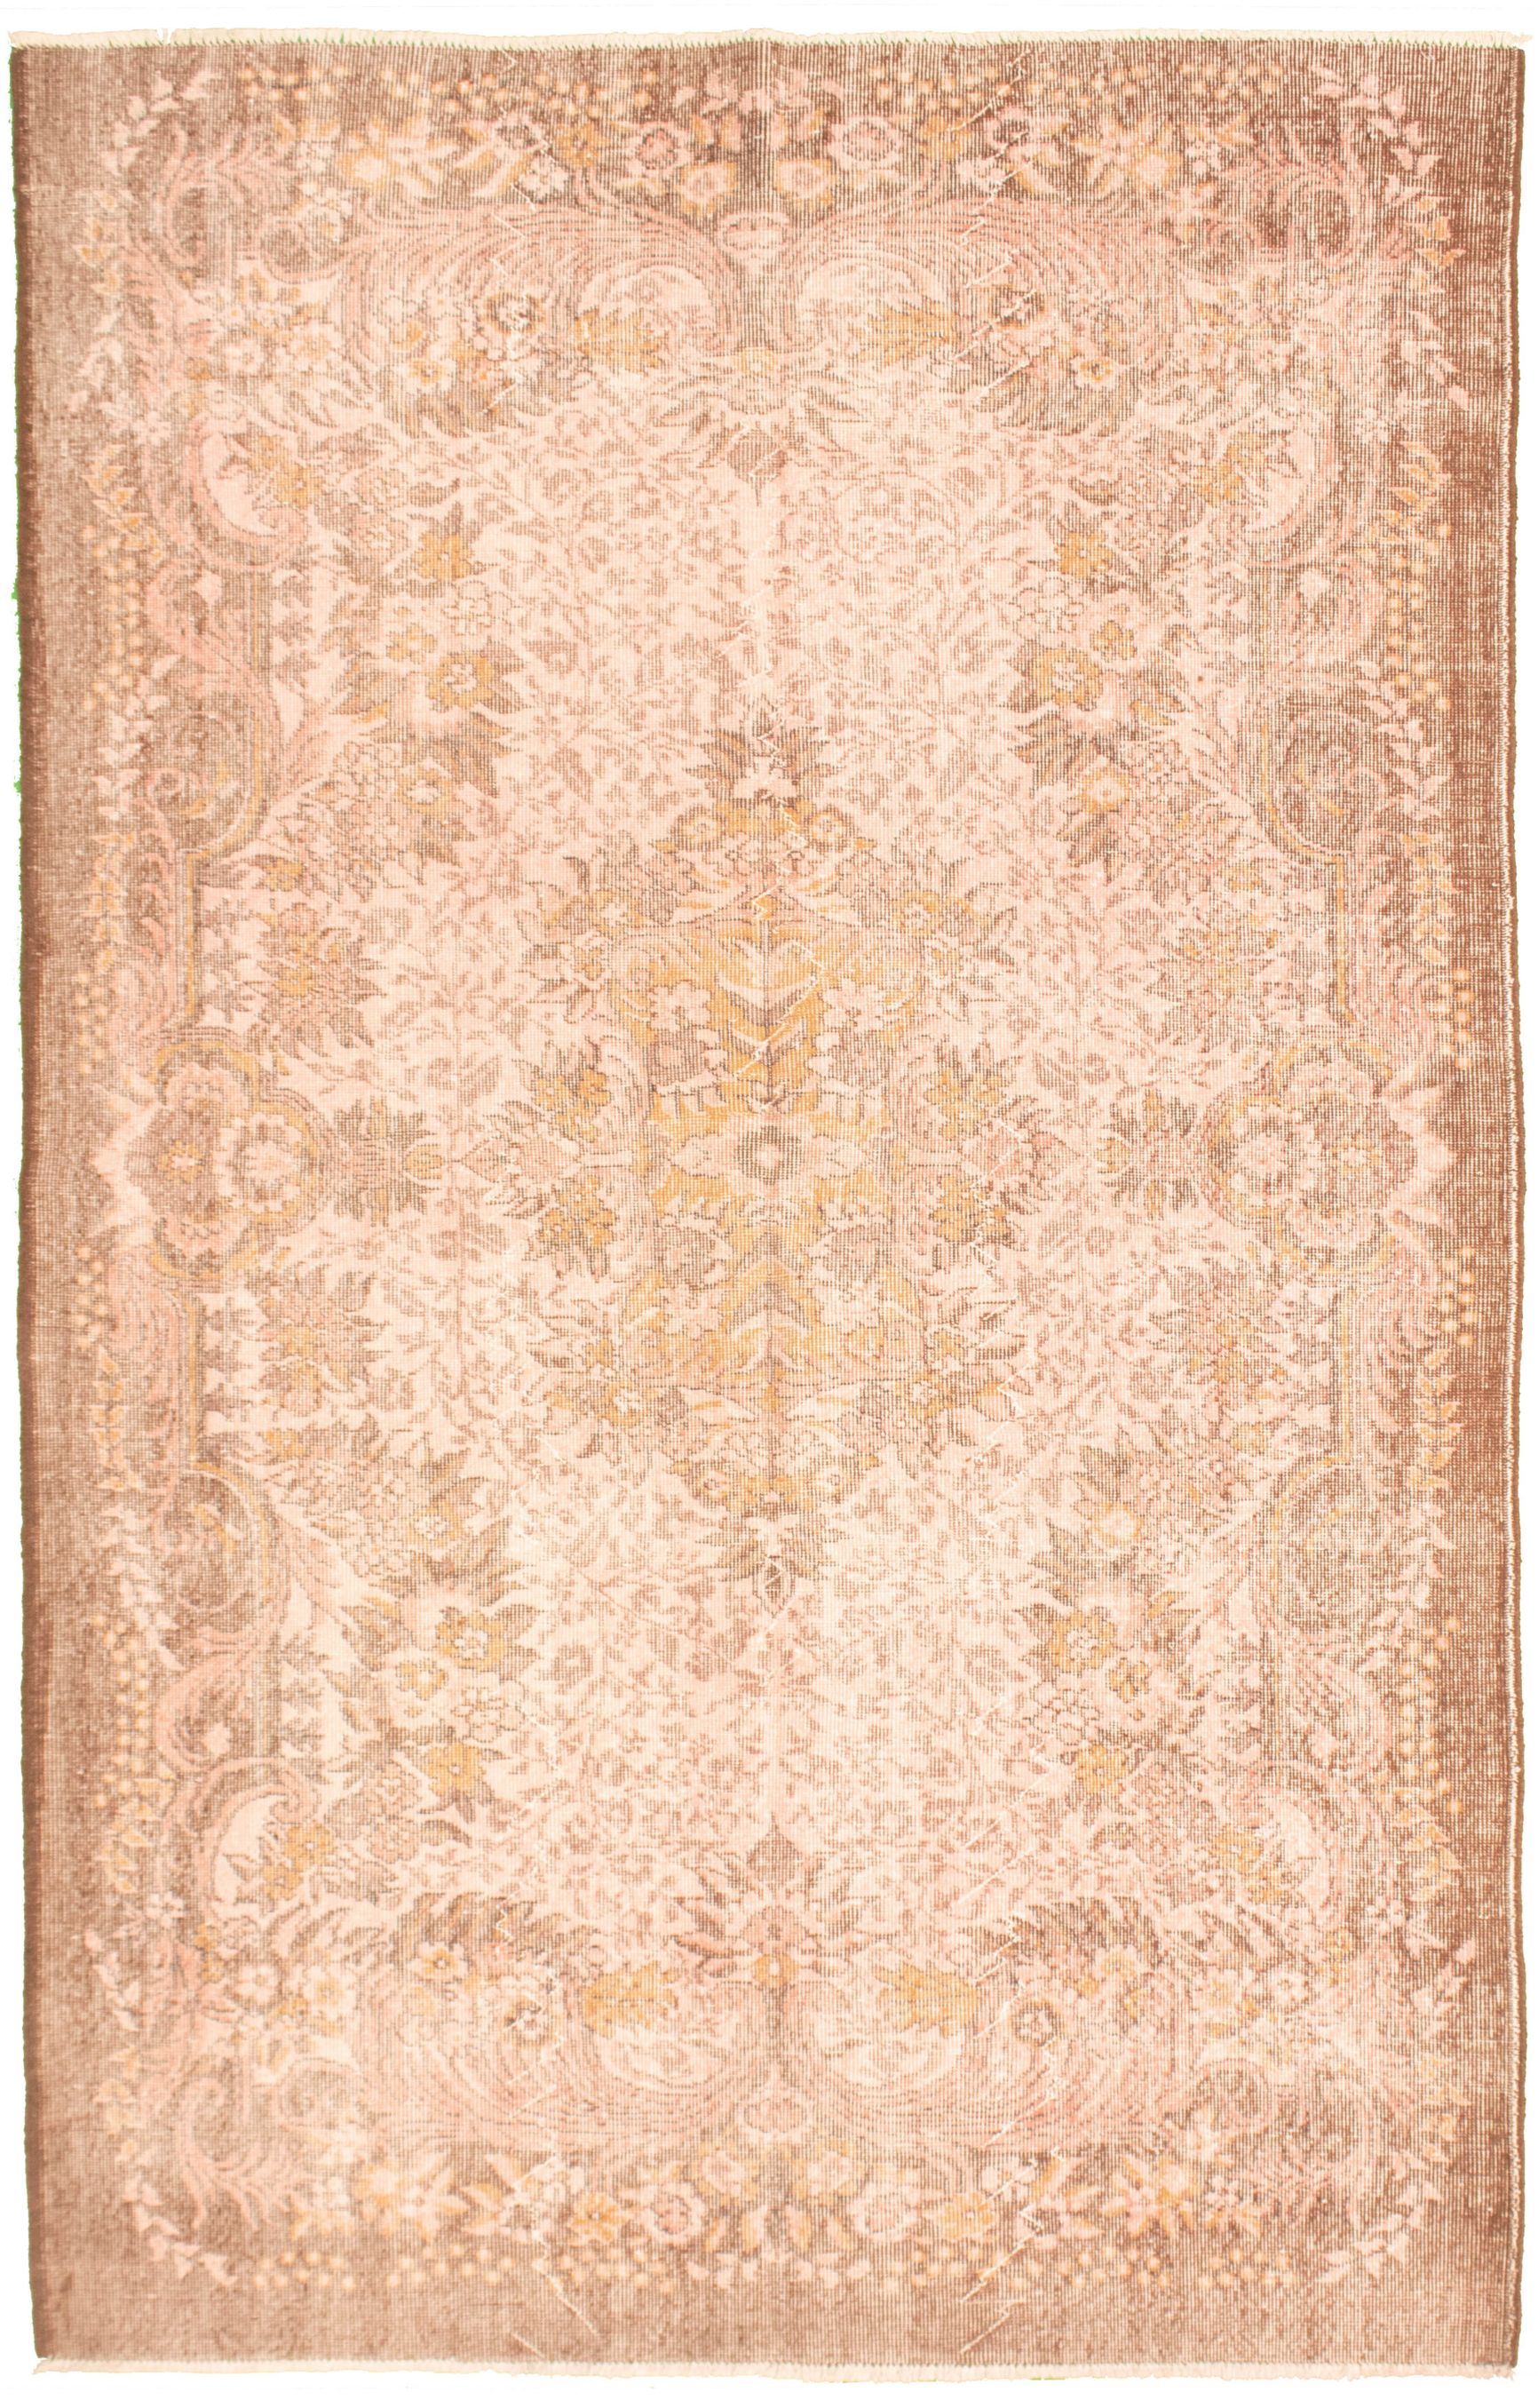 Hand-knotted Color Transition Salmon Wool Rug 6'1" x 9'10" Size: 6'1" x 9'10"  